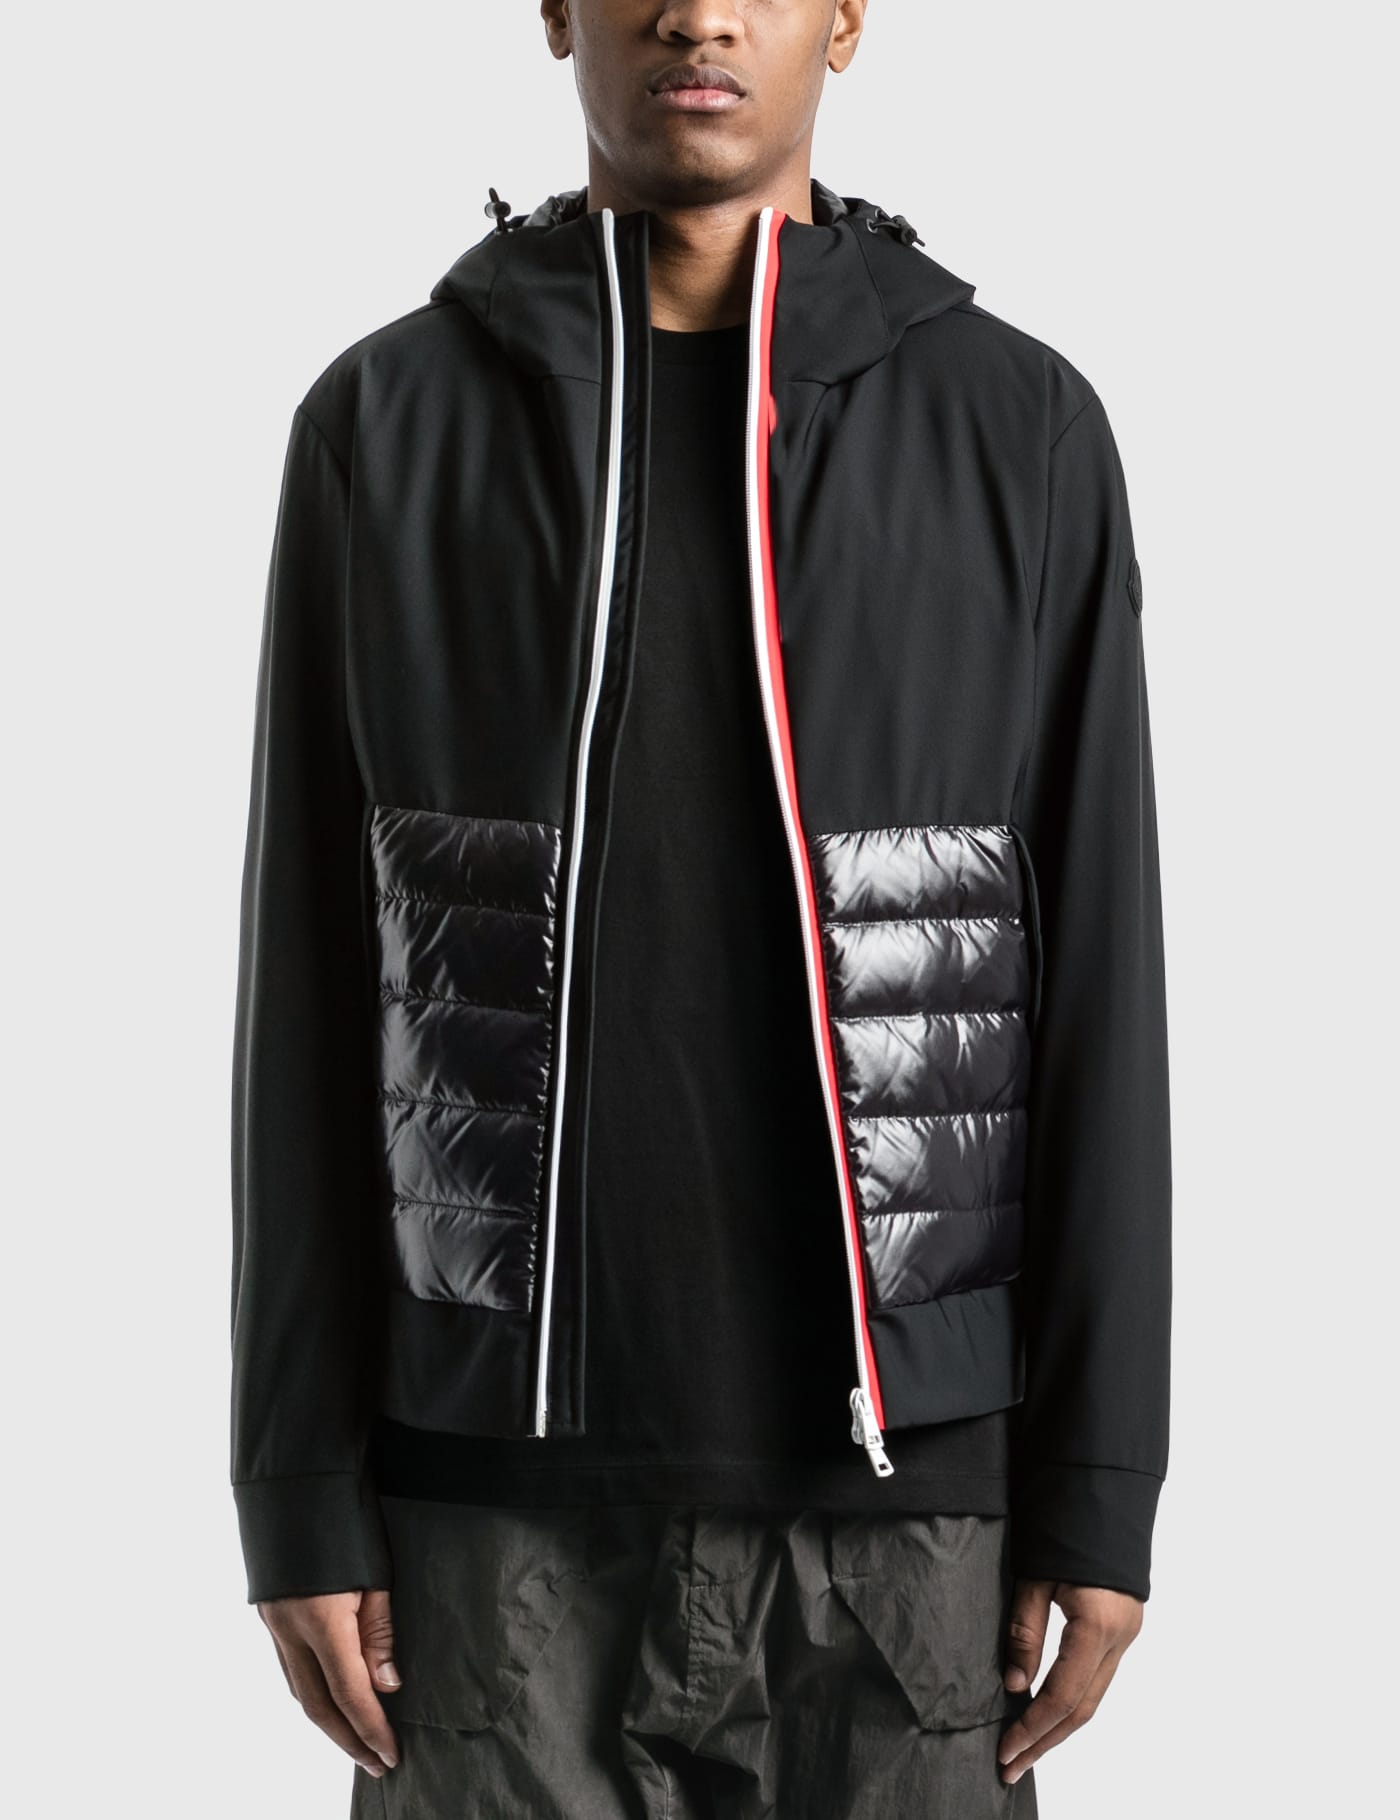 Moncler - Authion Jacket | HBX - Globally Curated Fashion and 